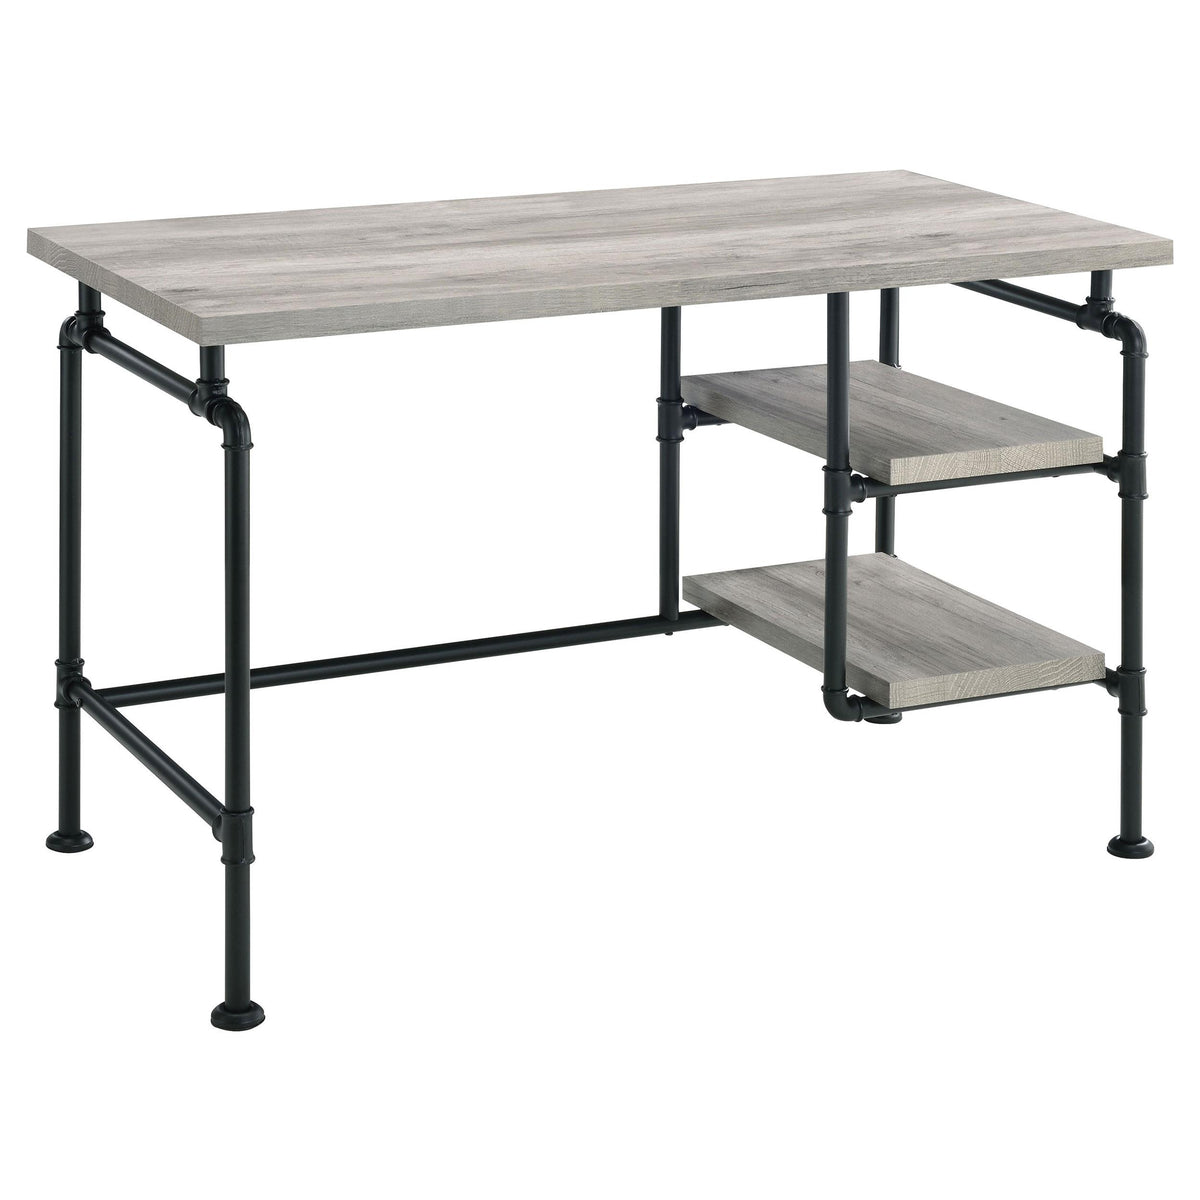 Delray 2-tier Open Shelving Writing Desk Grey Driftwood and Black  Las Vegas Furniture Stores